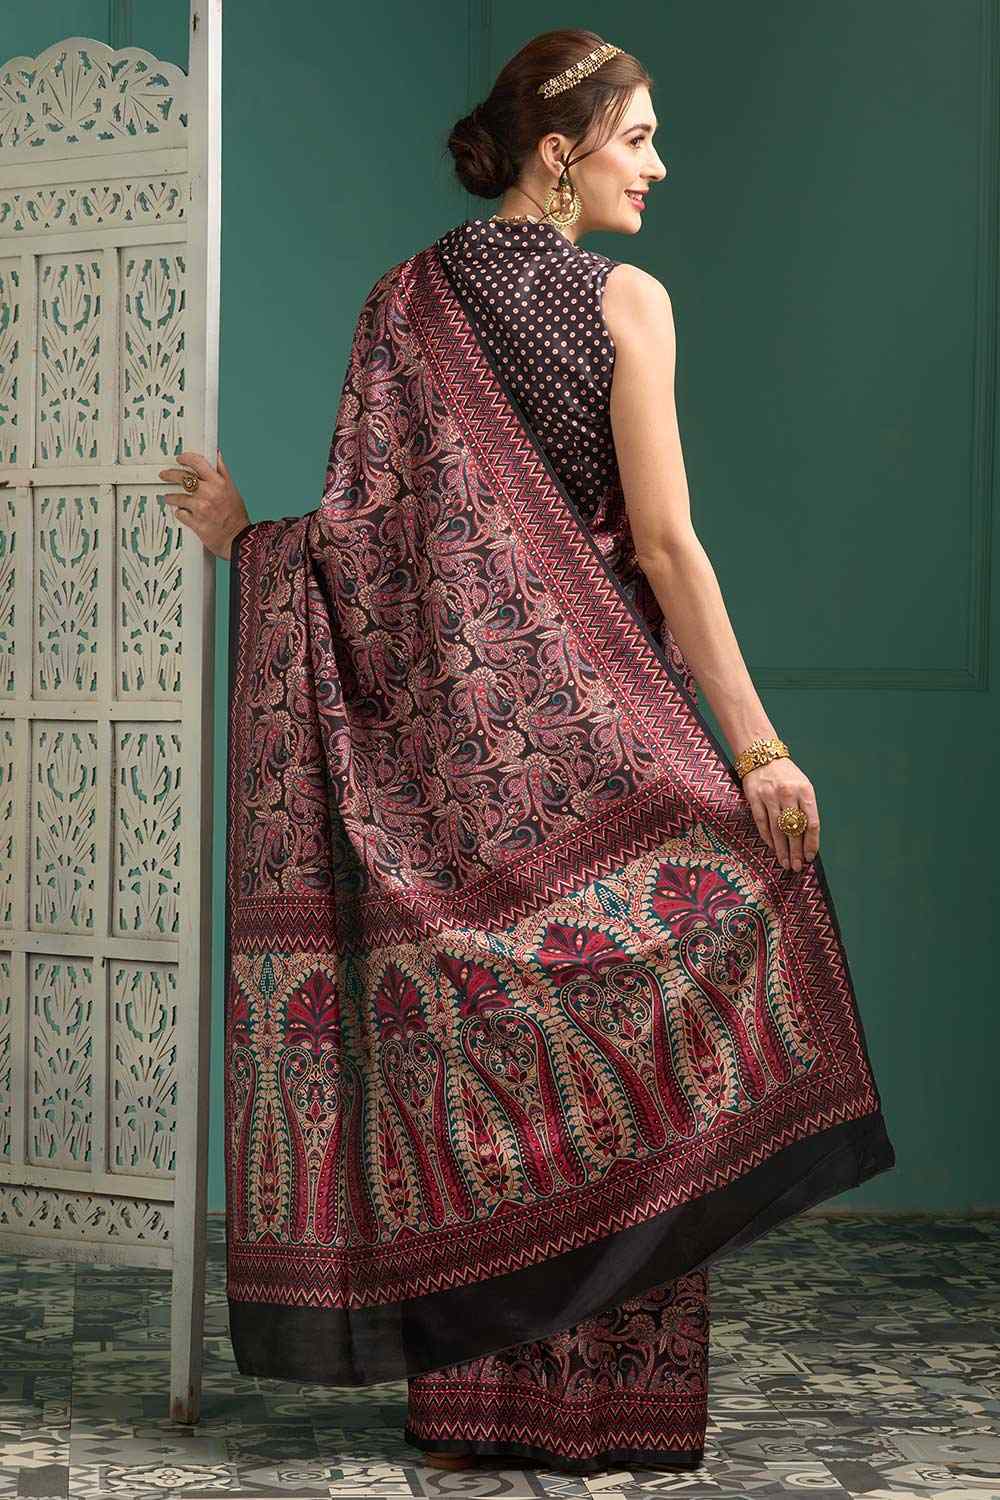 Shop Shana Black Manipuri Silk Paisley Digital Block Print One Minute Saree at best offer at our  Store - One Minute Saree